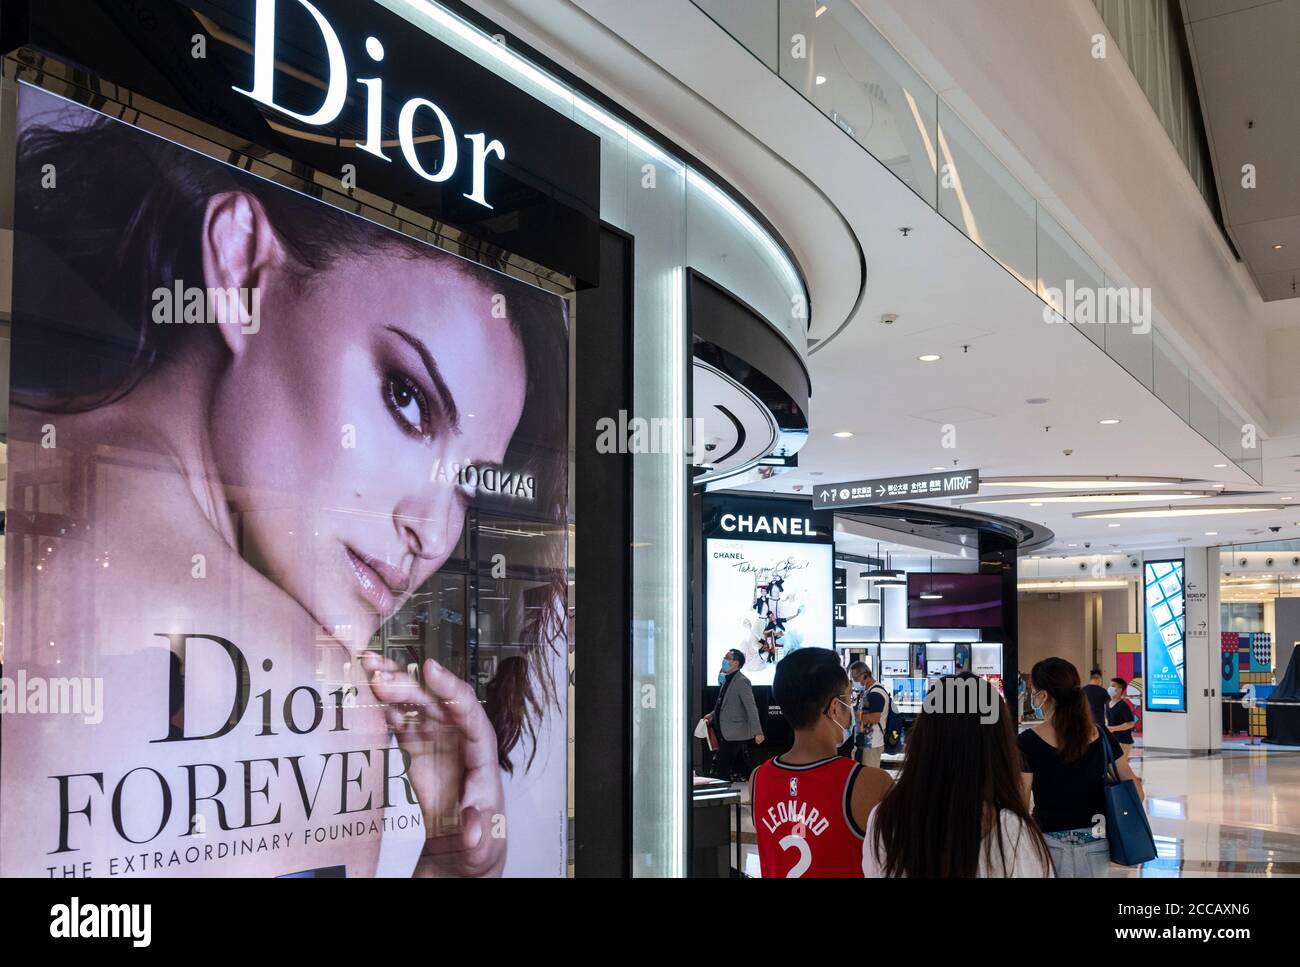 French Christian Dior luxury goods, clothing and beauty products